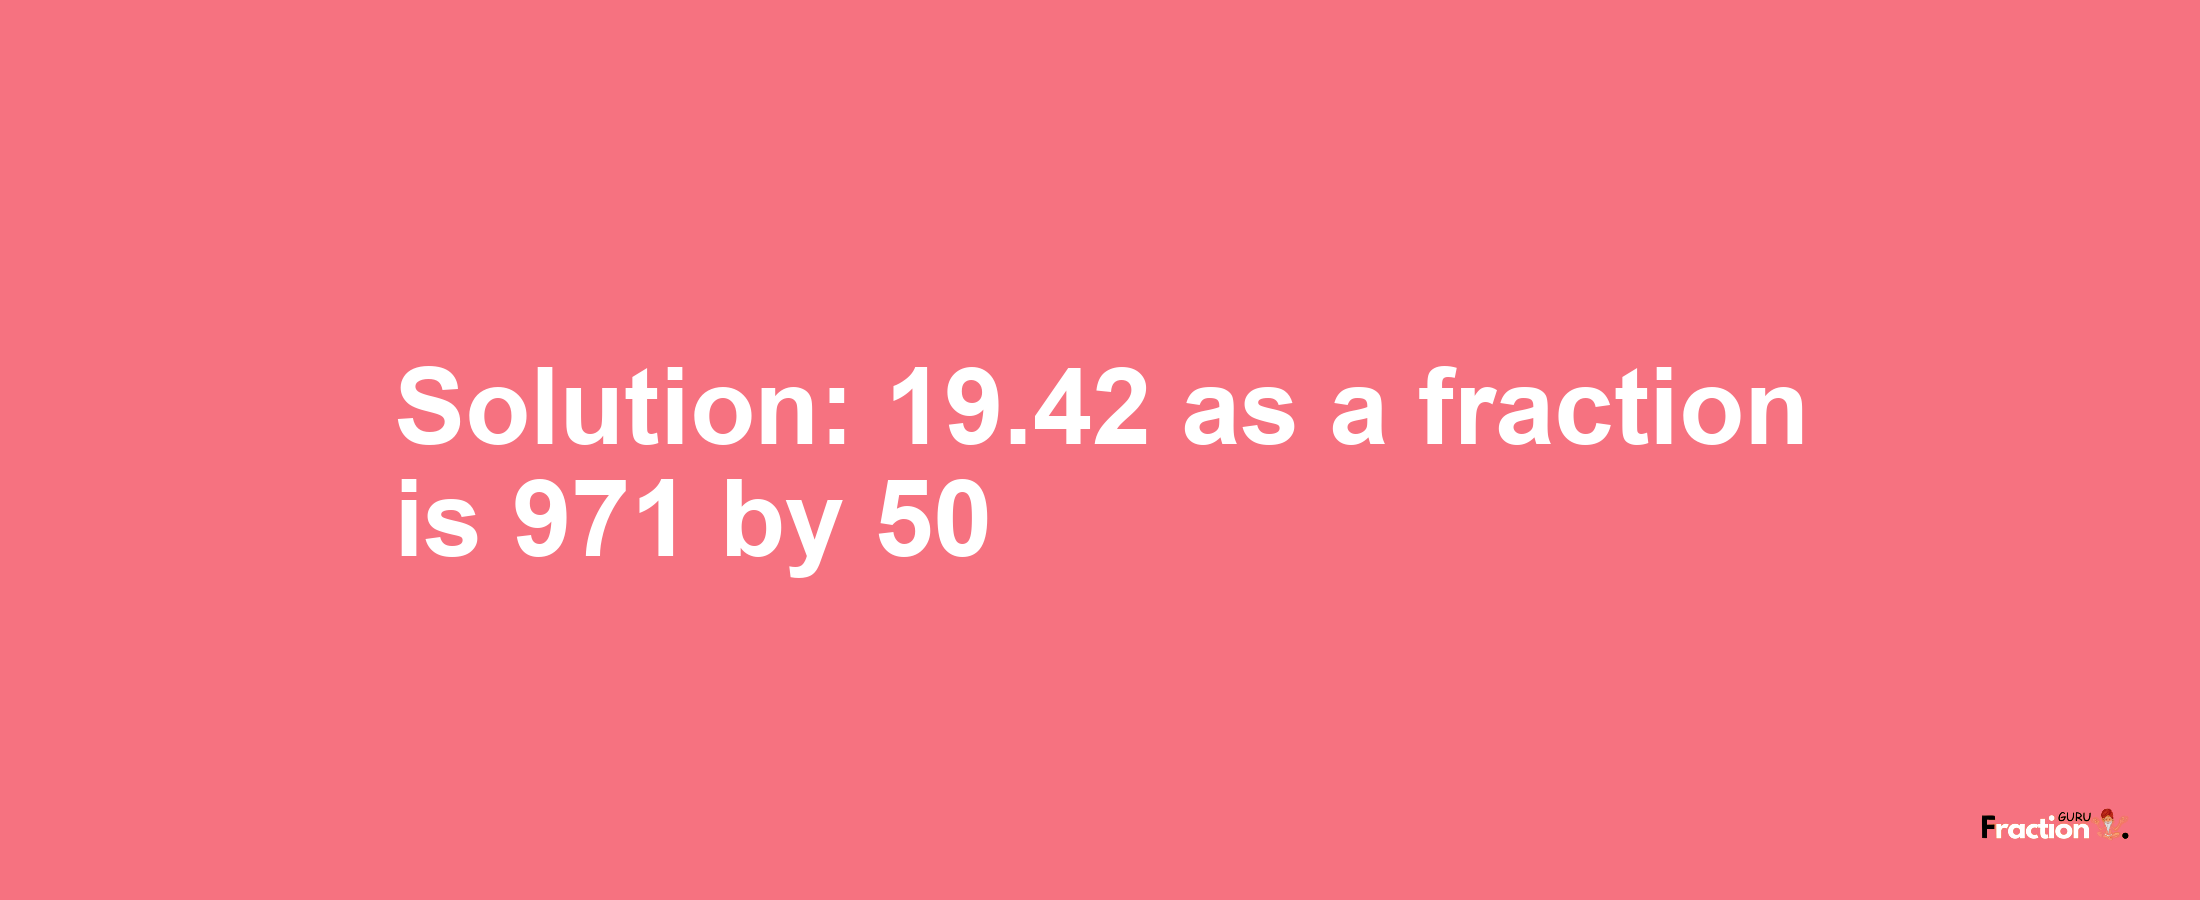 Solution:19.42 as a fraction is 971/50